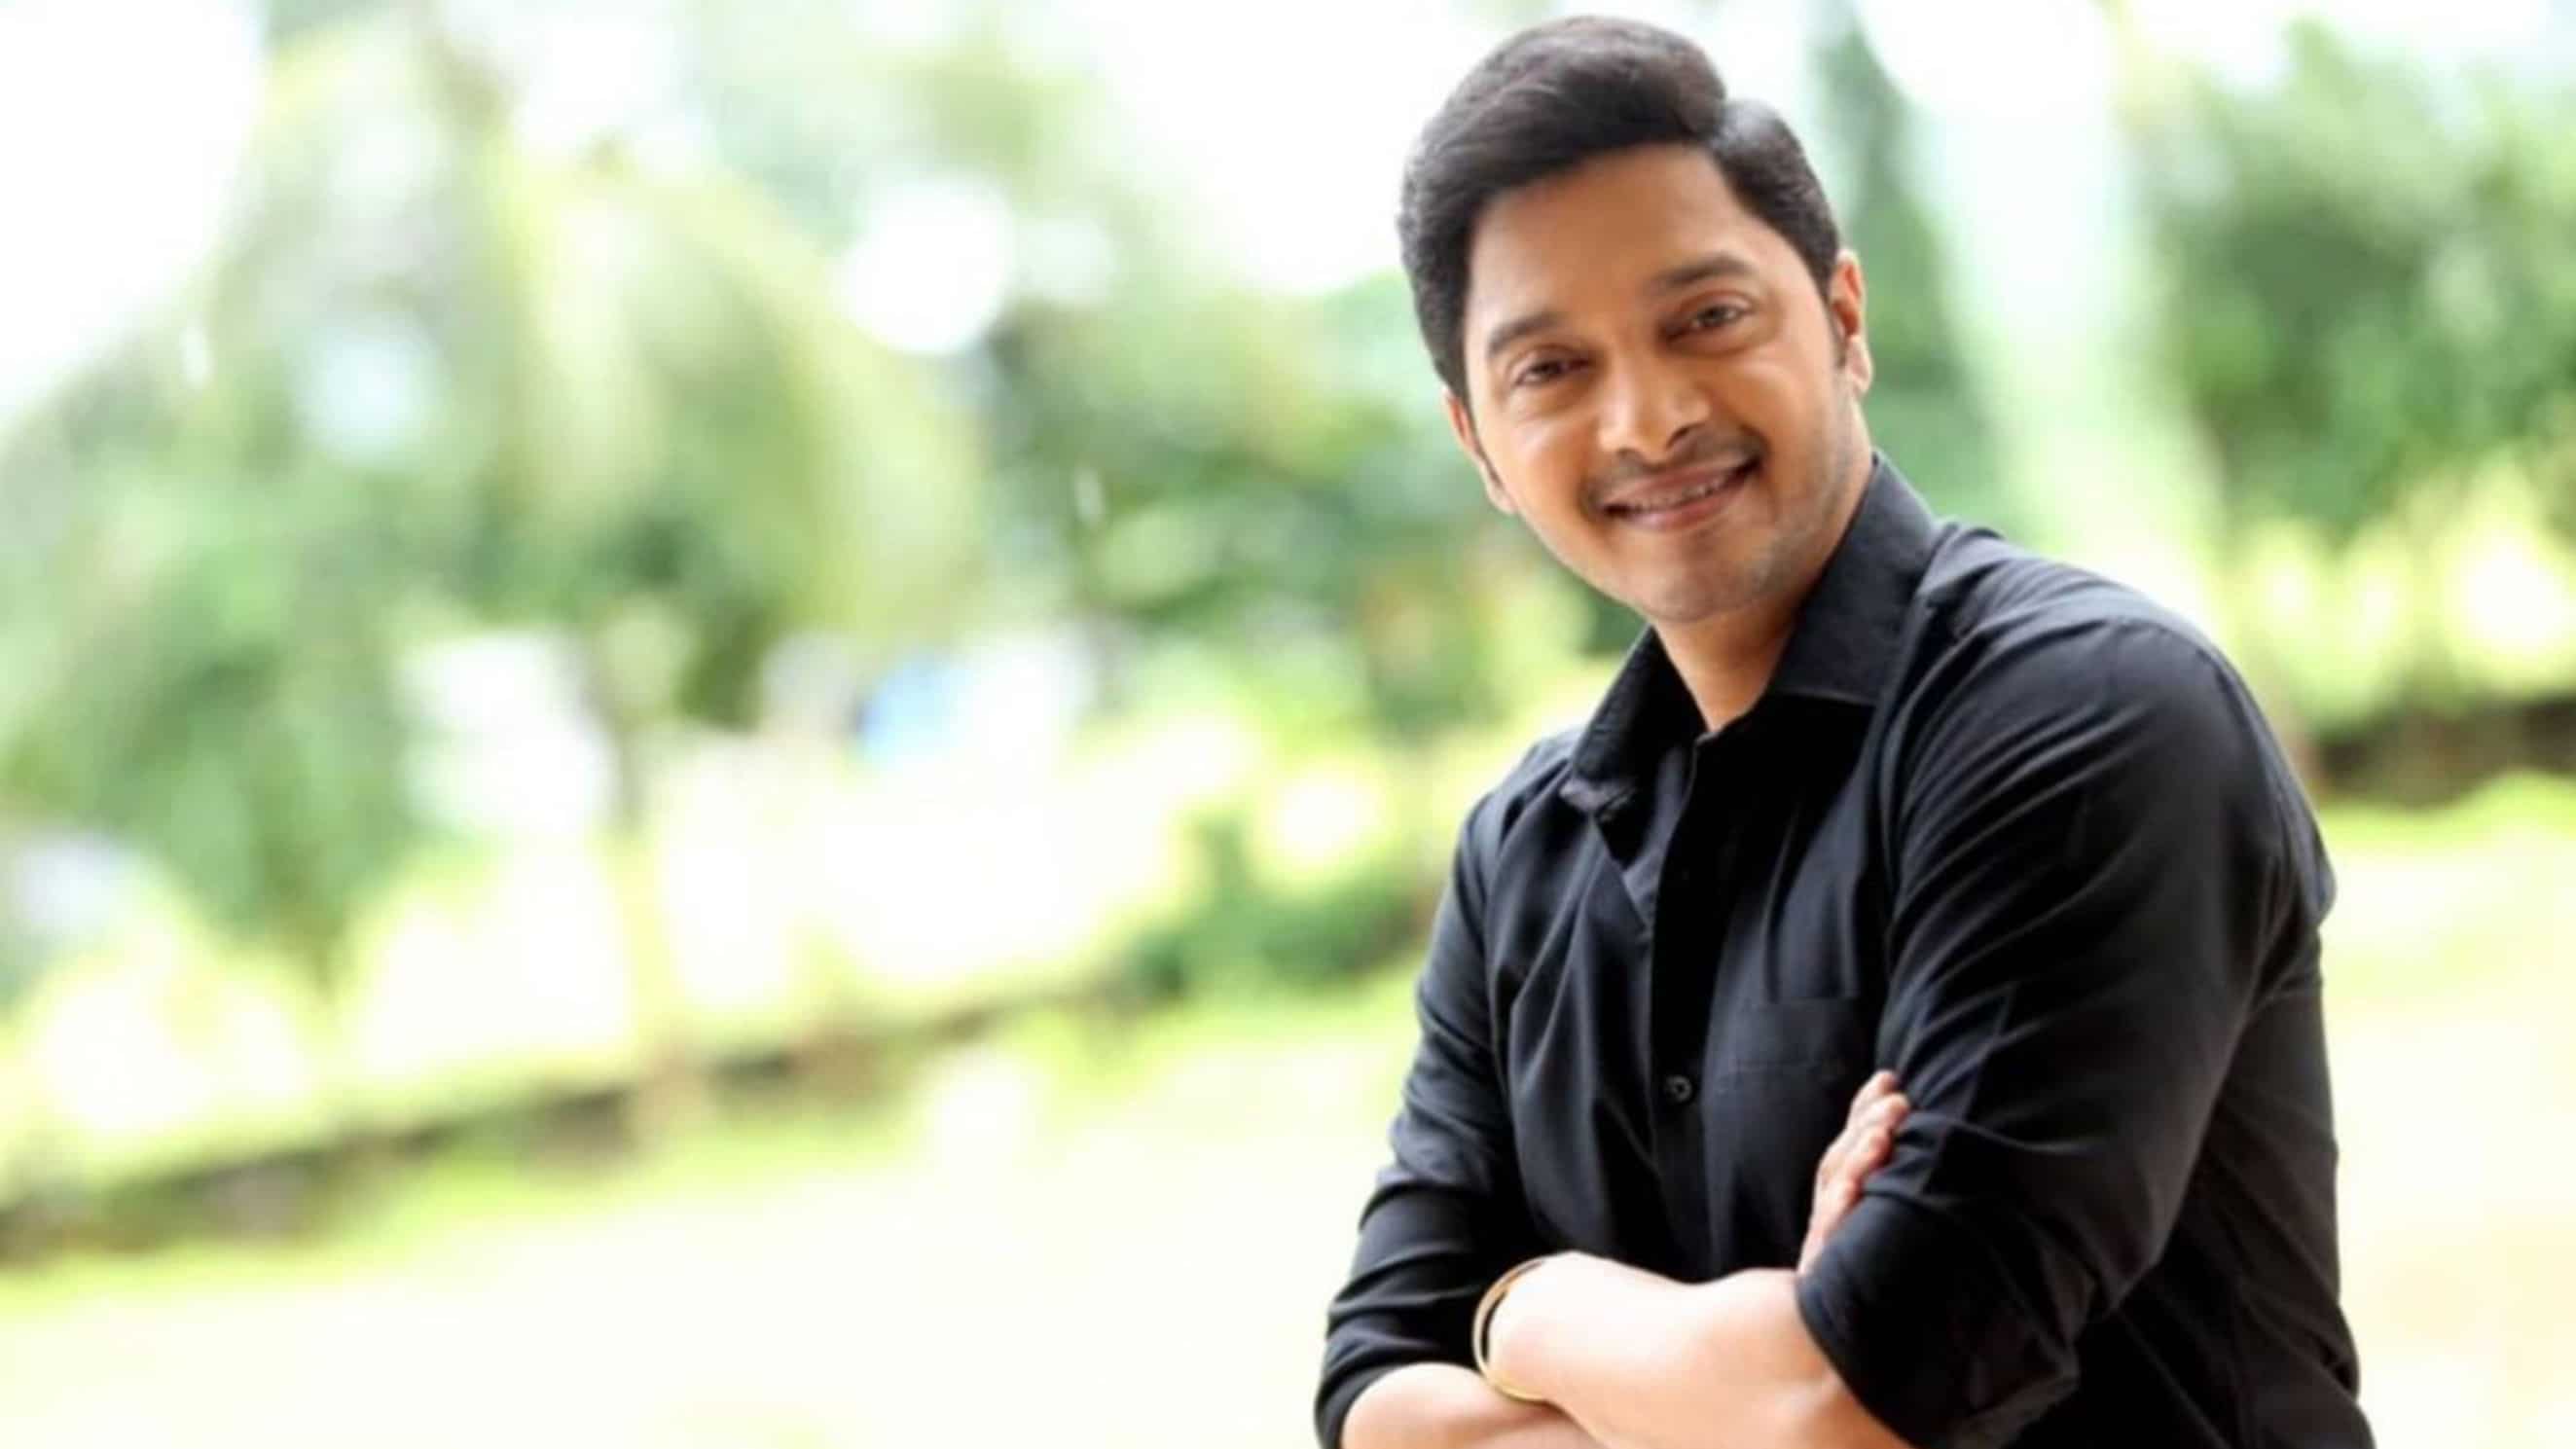 https://www.mobilemasala.com/film-gossip/Shreyas-Talpade-feels-his-heart-attack-could-be-a-side-effect-of-taking-COVID-19-vaccine-i260684